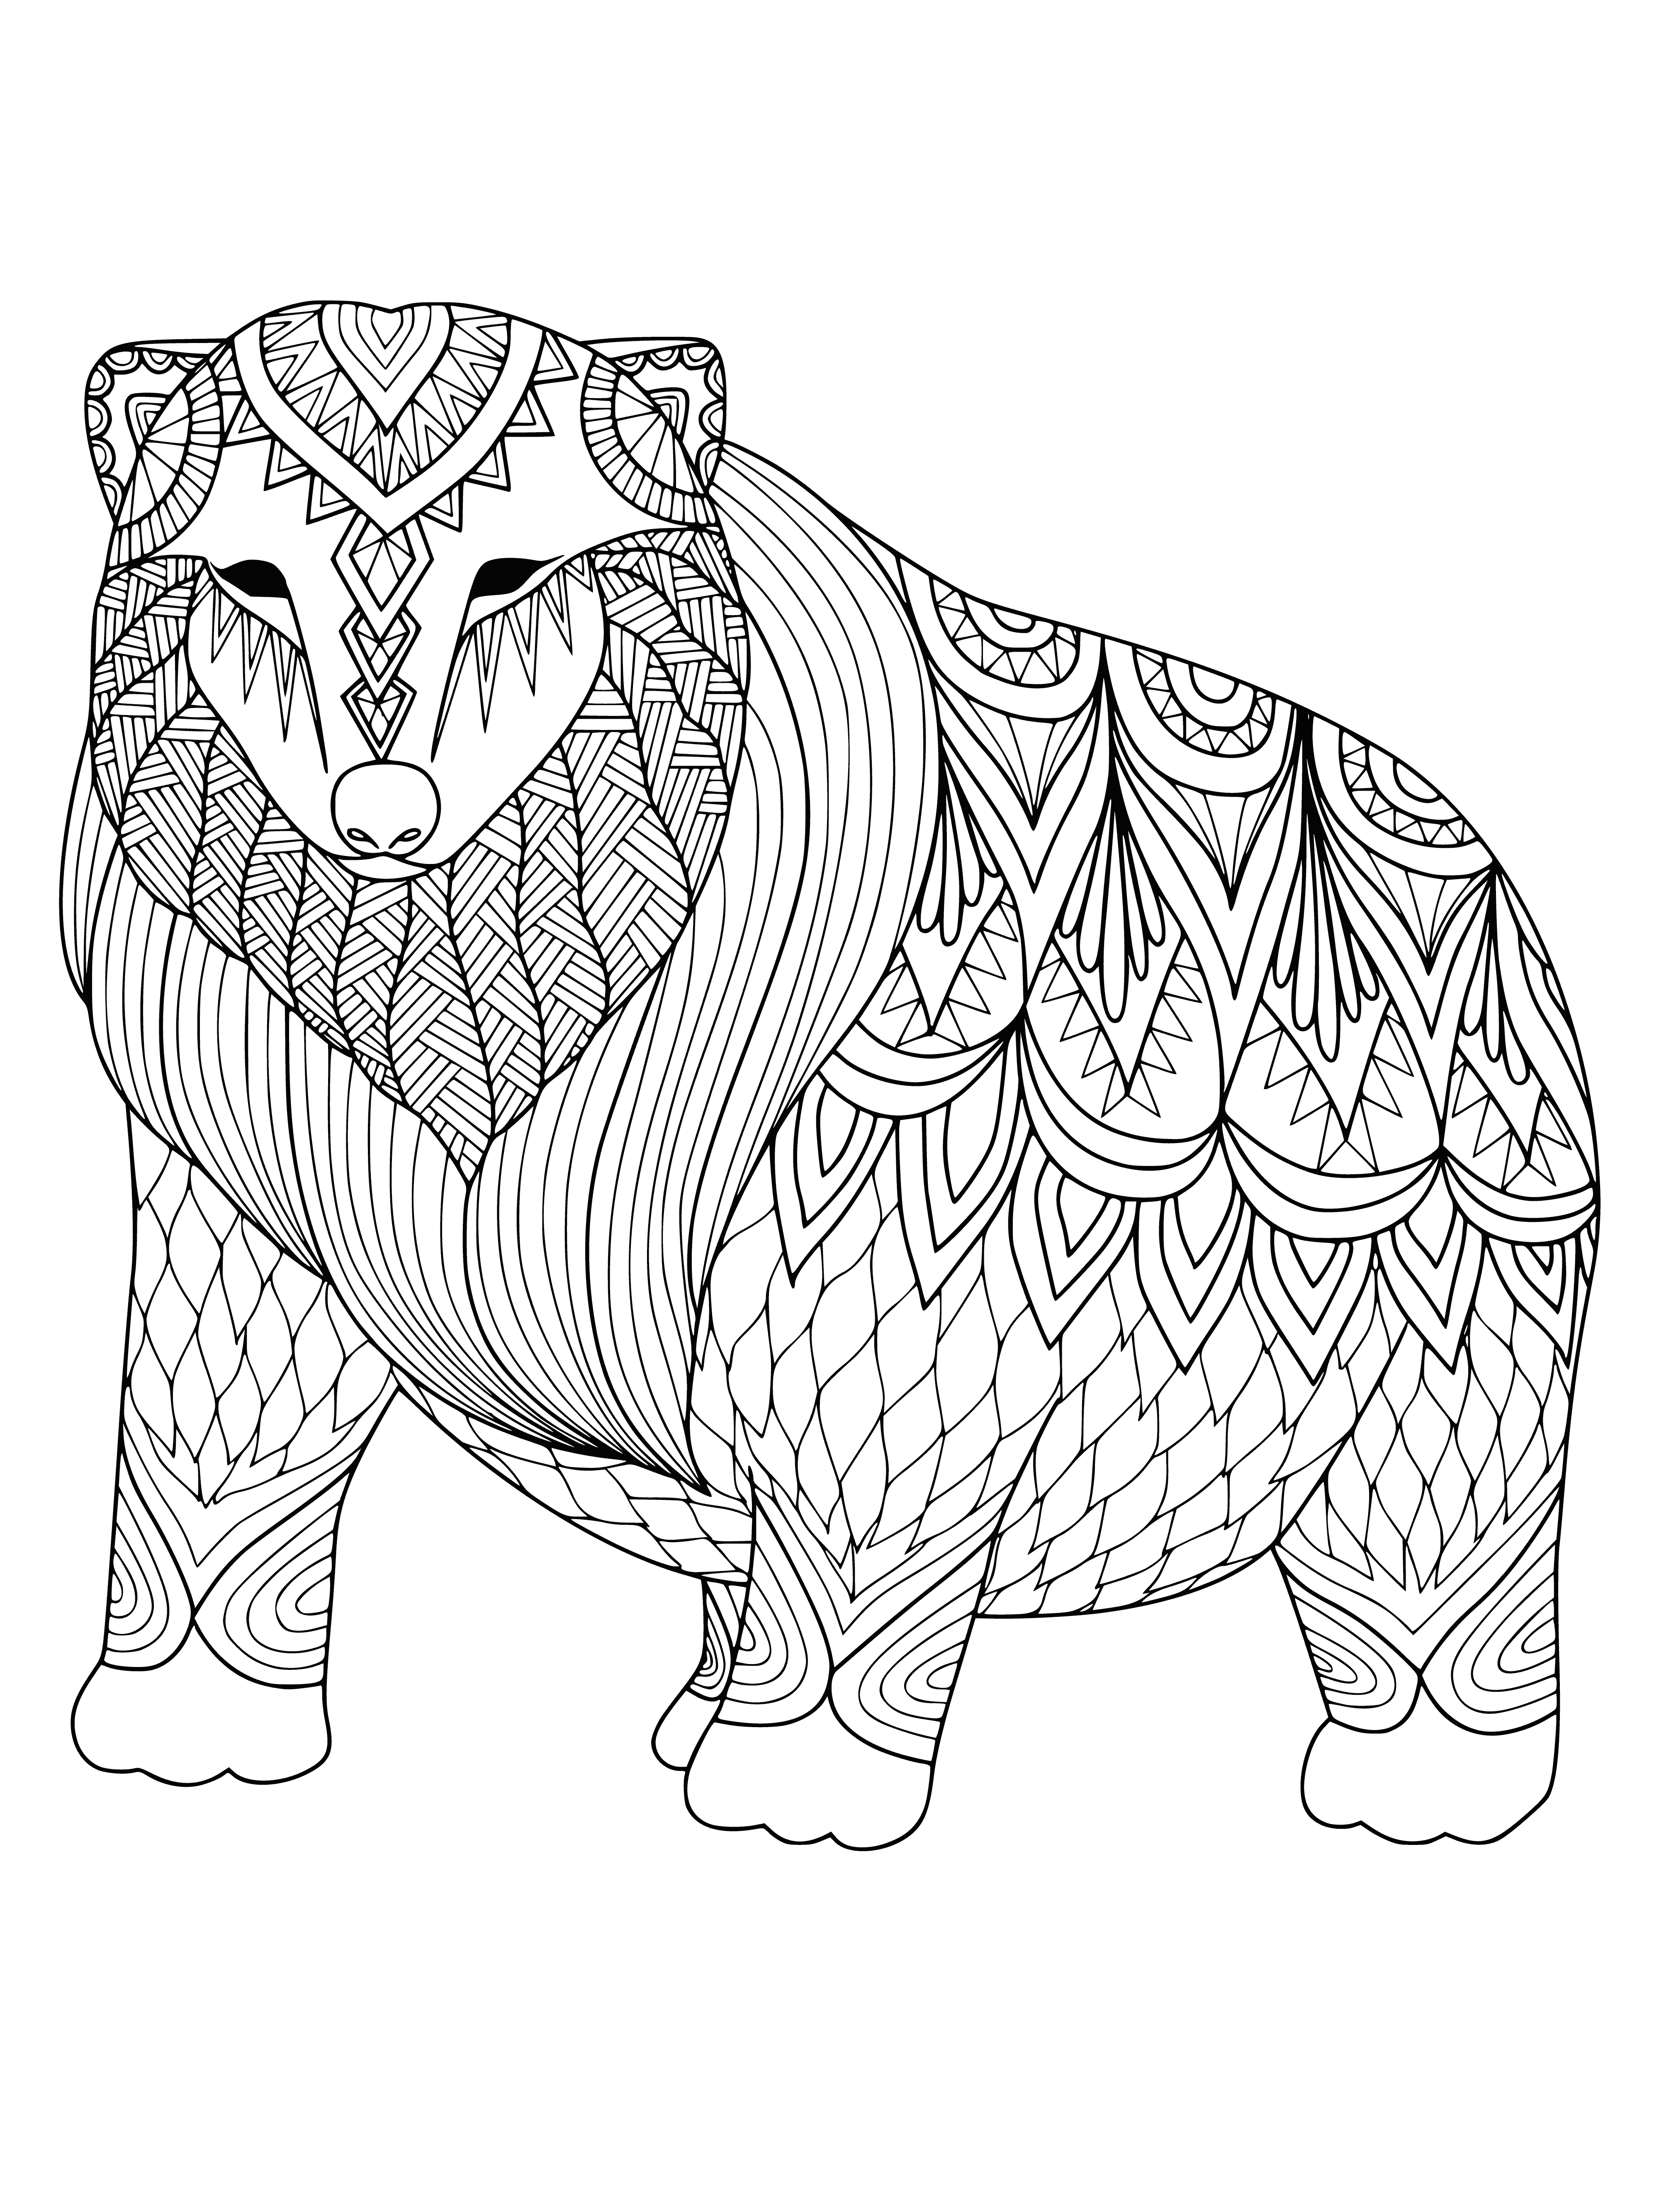 coloring page: Adorable polar bear standing on ice. Has big black eyes, pink tongue, and big claws! #polarbear